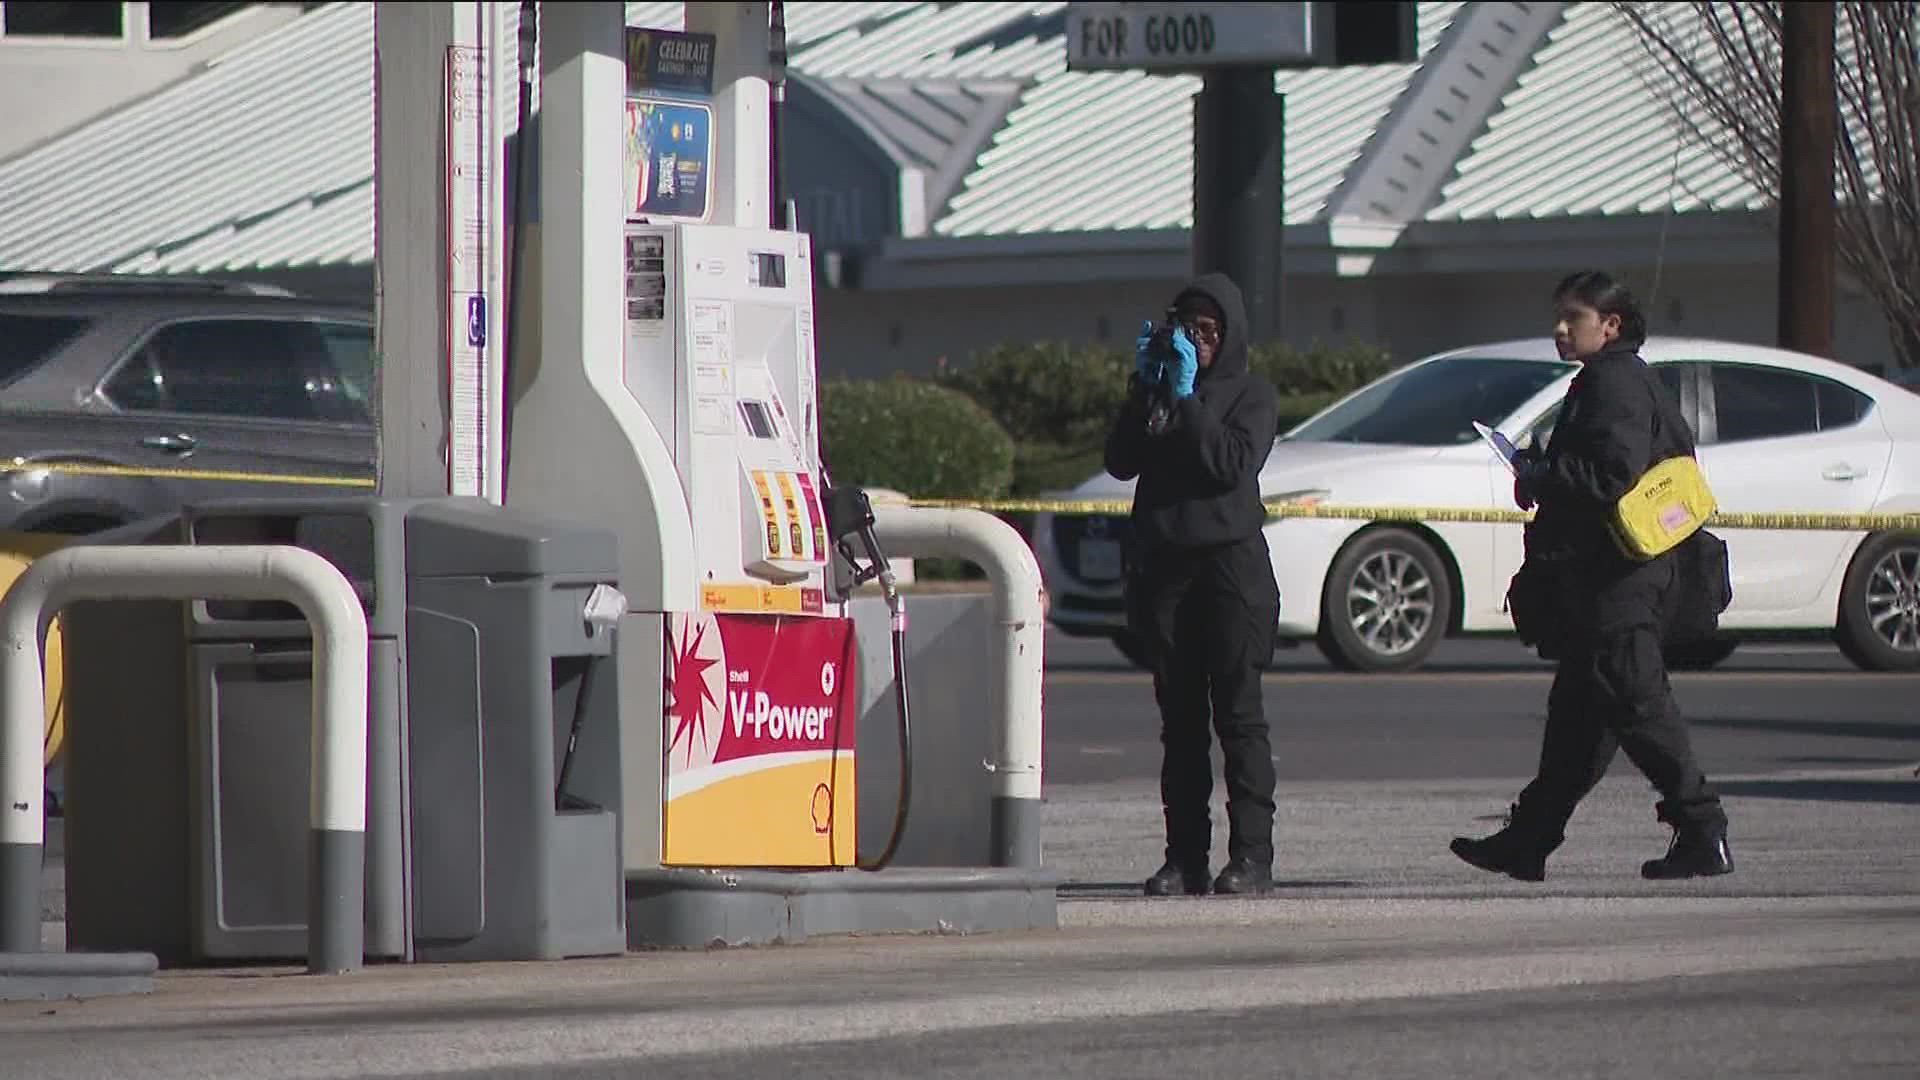 It happened at a Shell gas station on Flat Shoals Road shortly before 1 p.m.